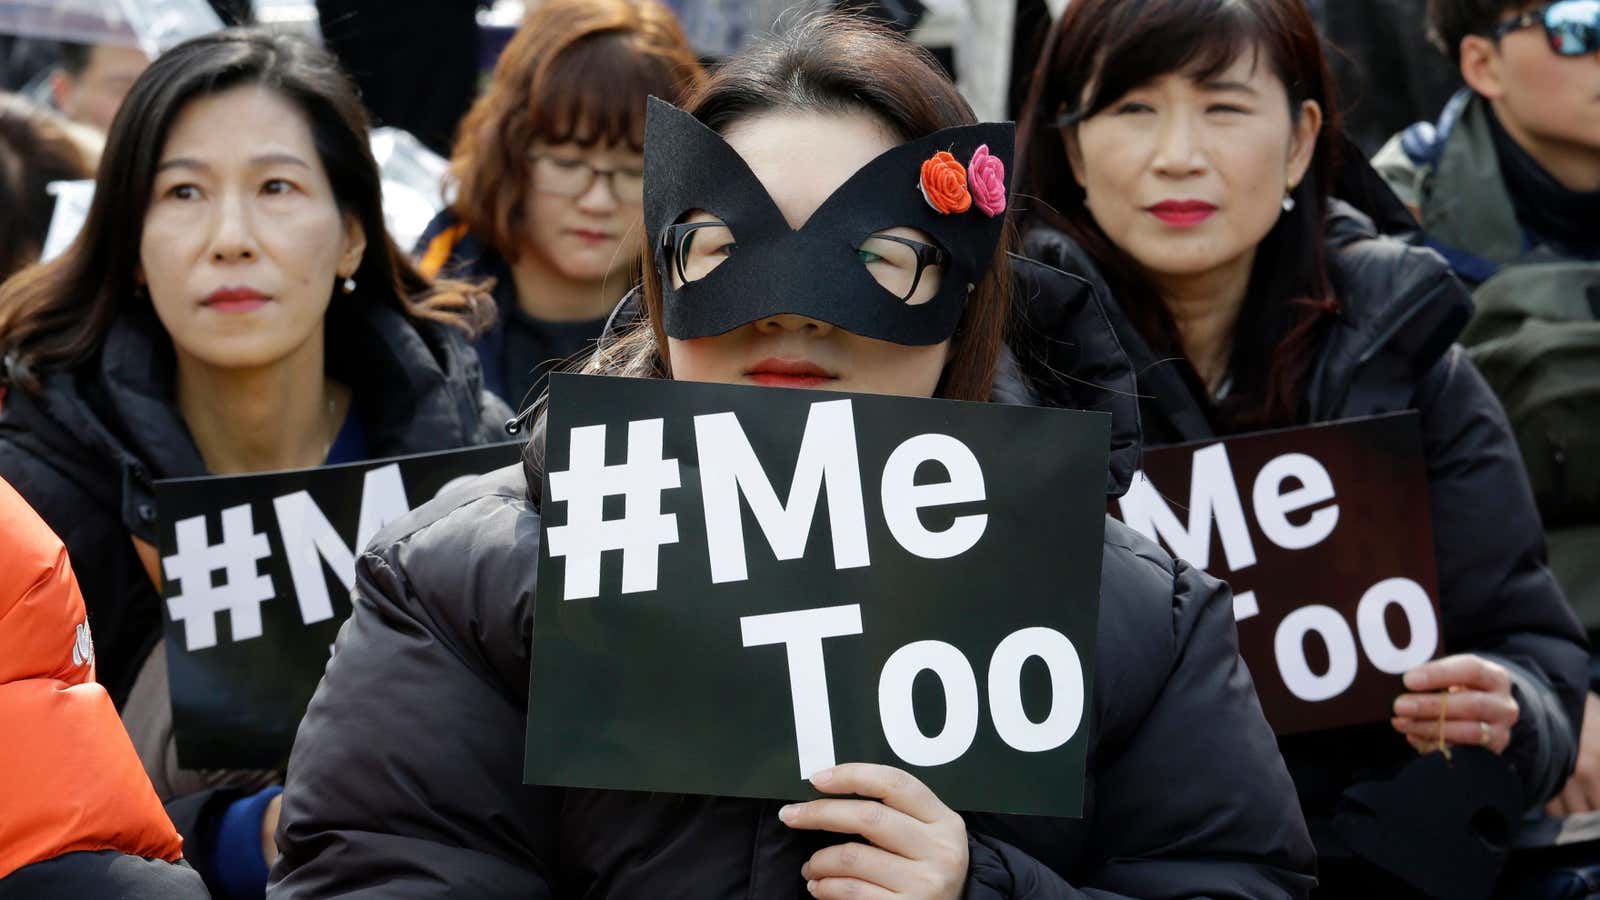 #MeToo is about more than overt misogyny.